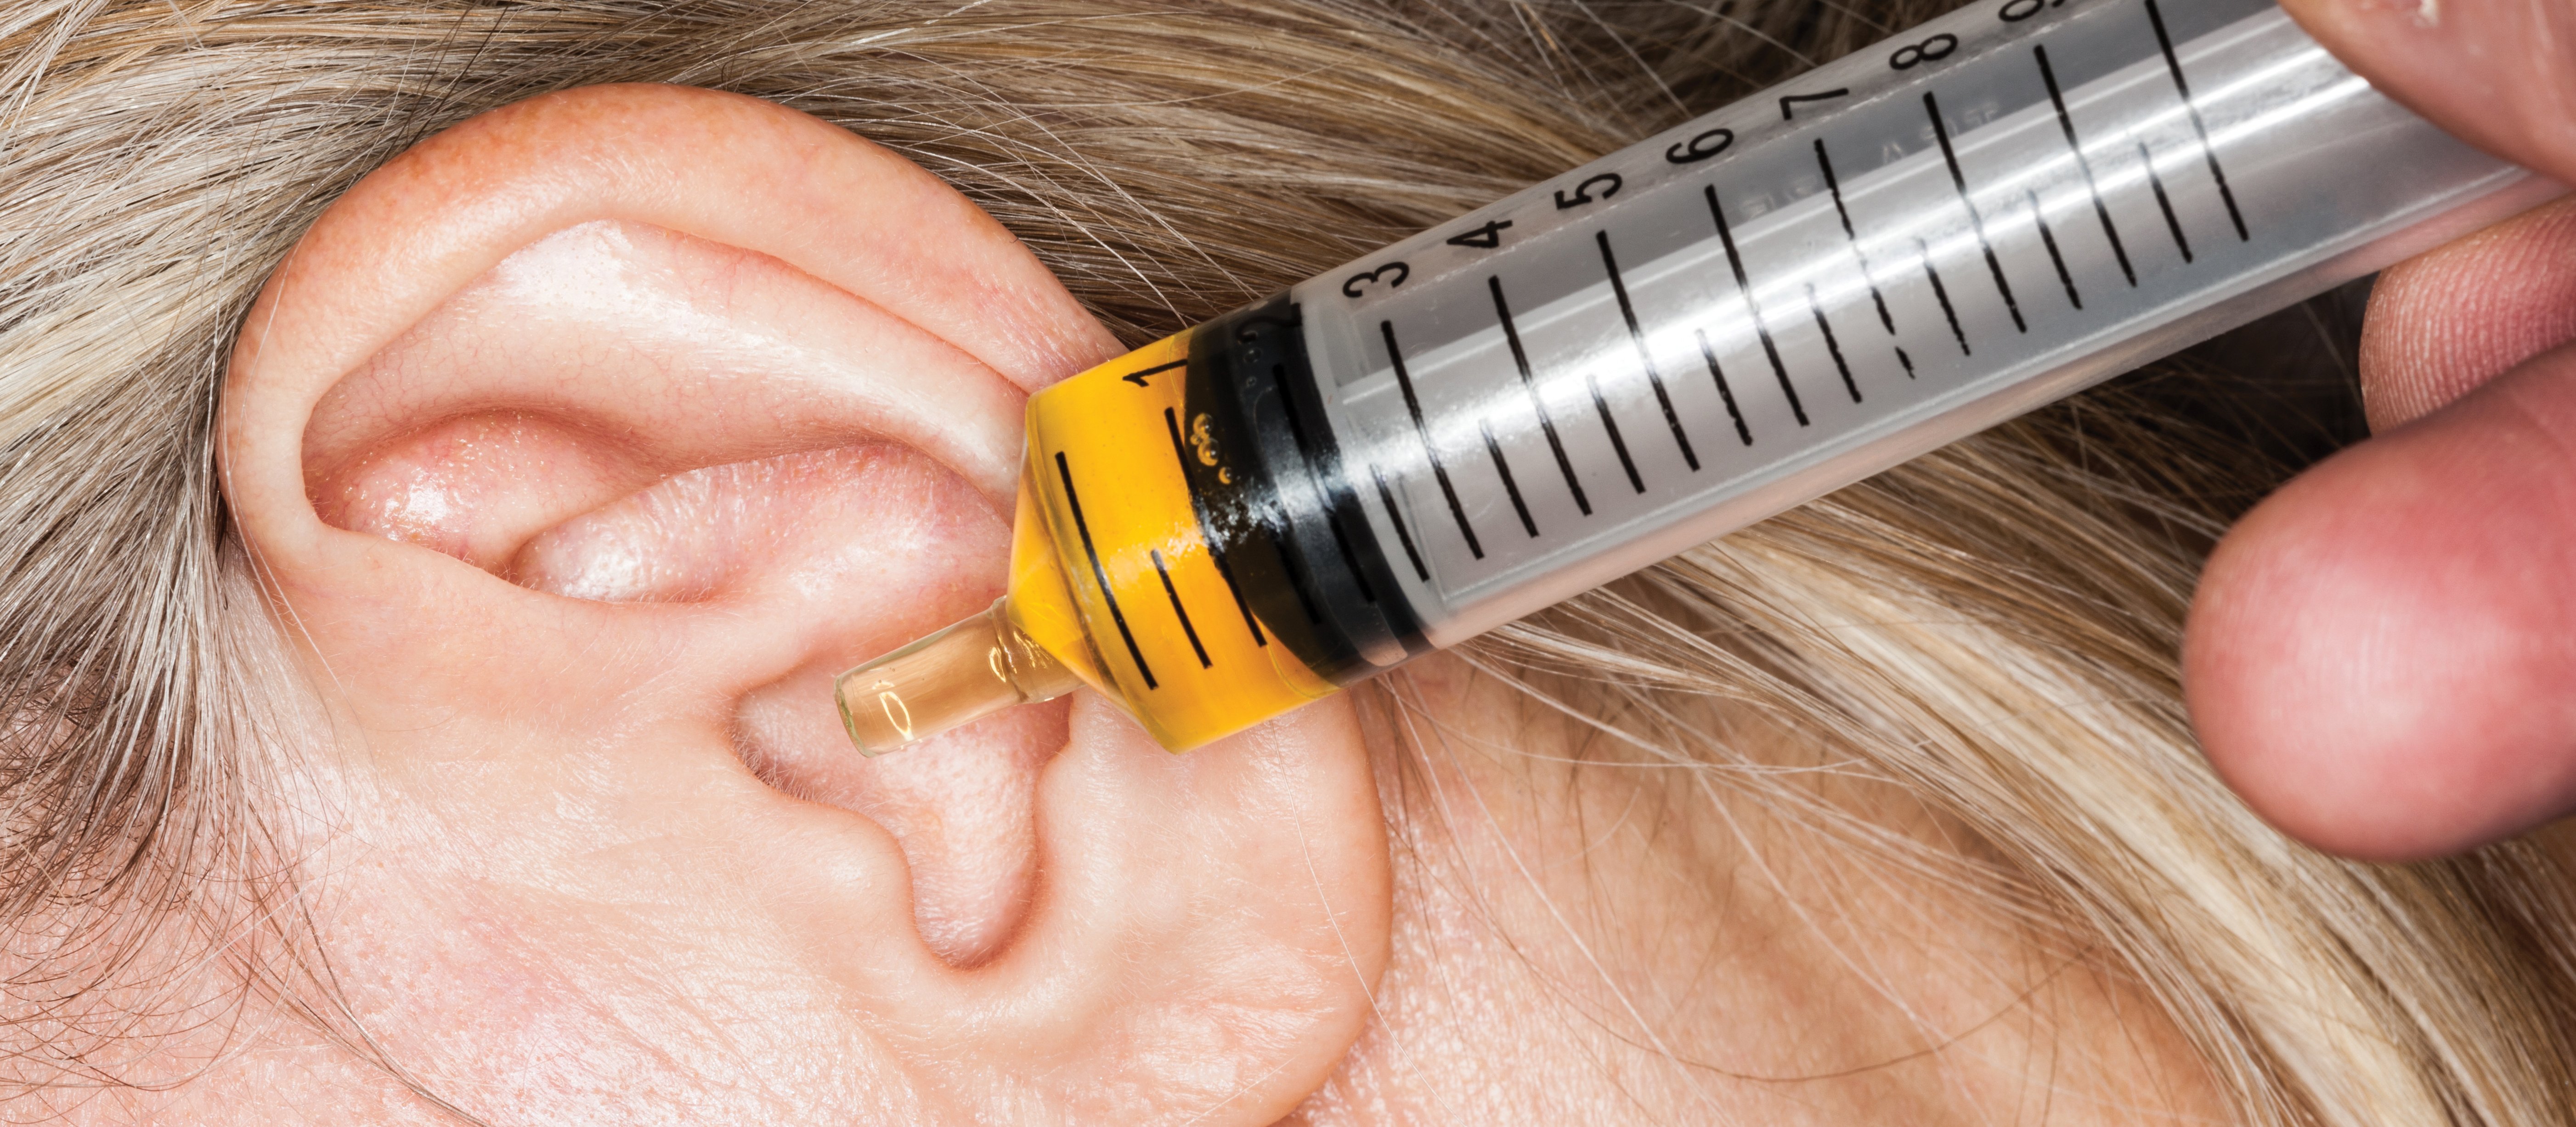 Softening earwax with olive oil